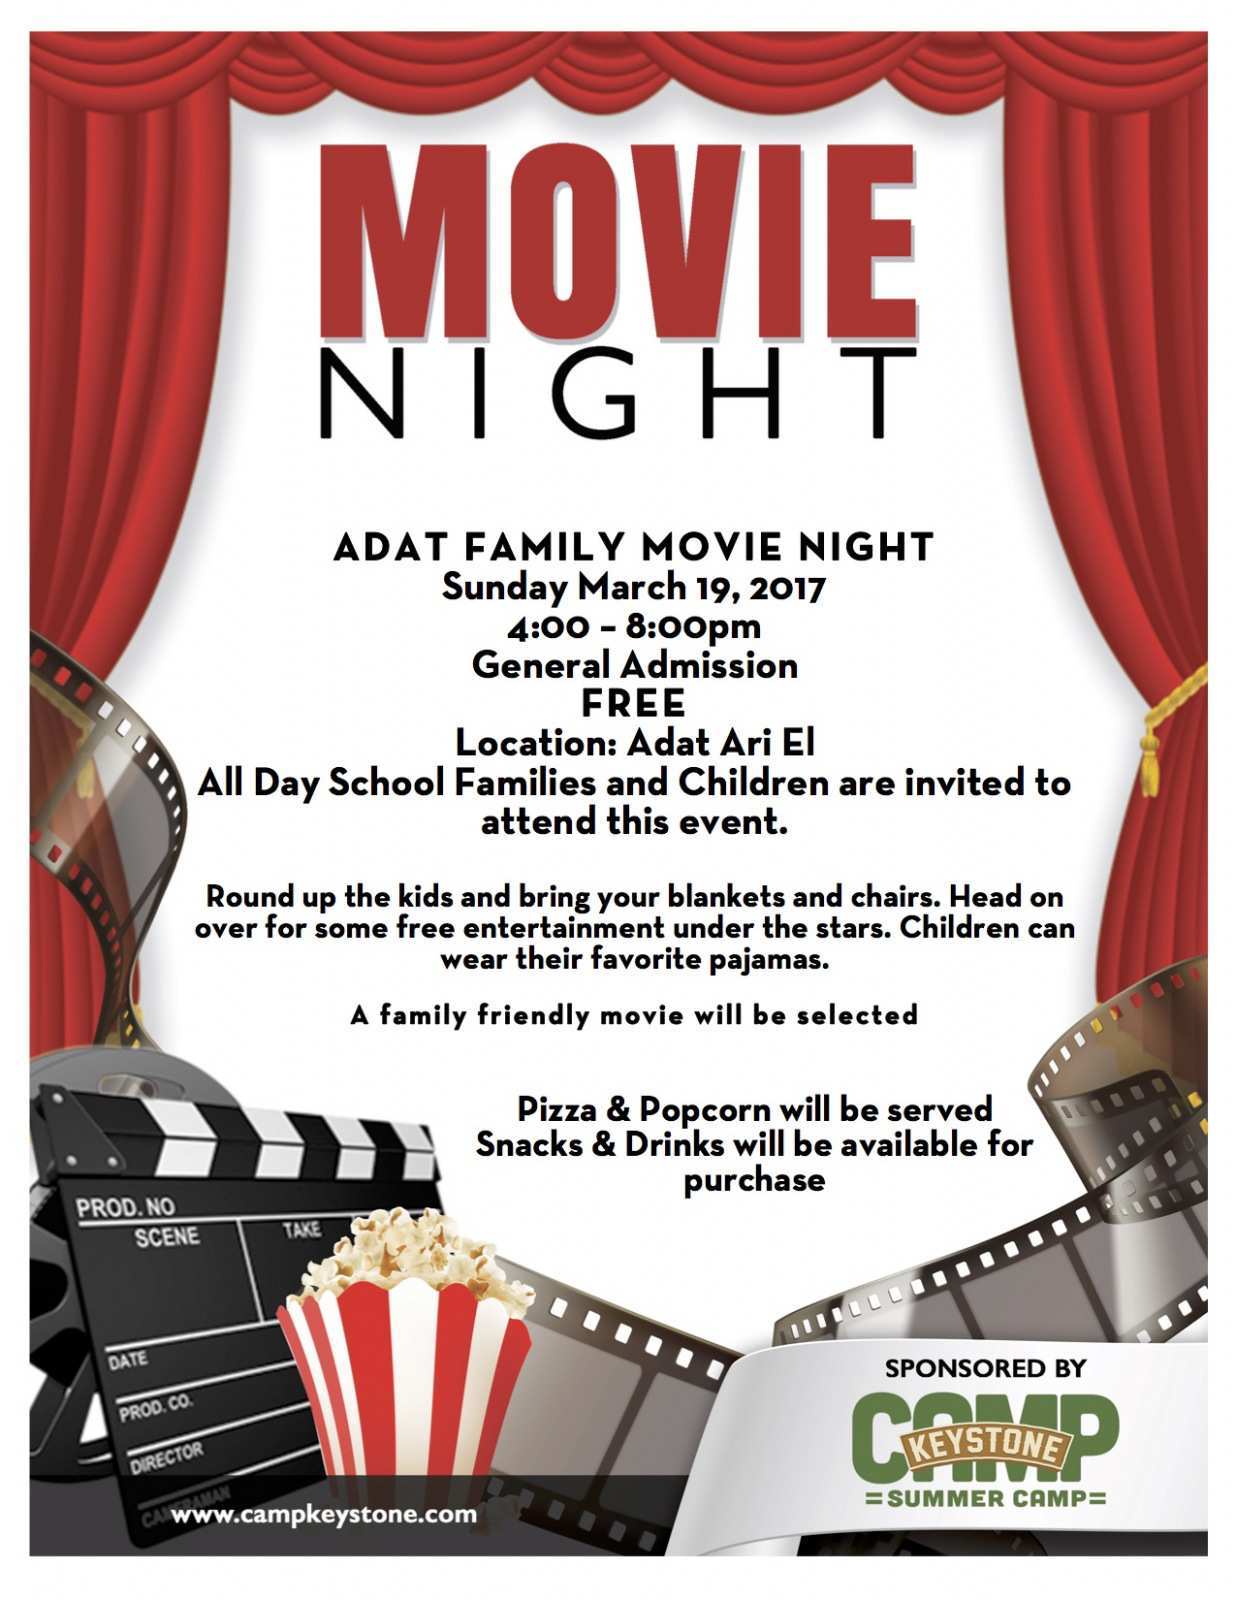 66 Format Free Movie Night Flyer Template Photo for Free Movie Night Flyer Template